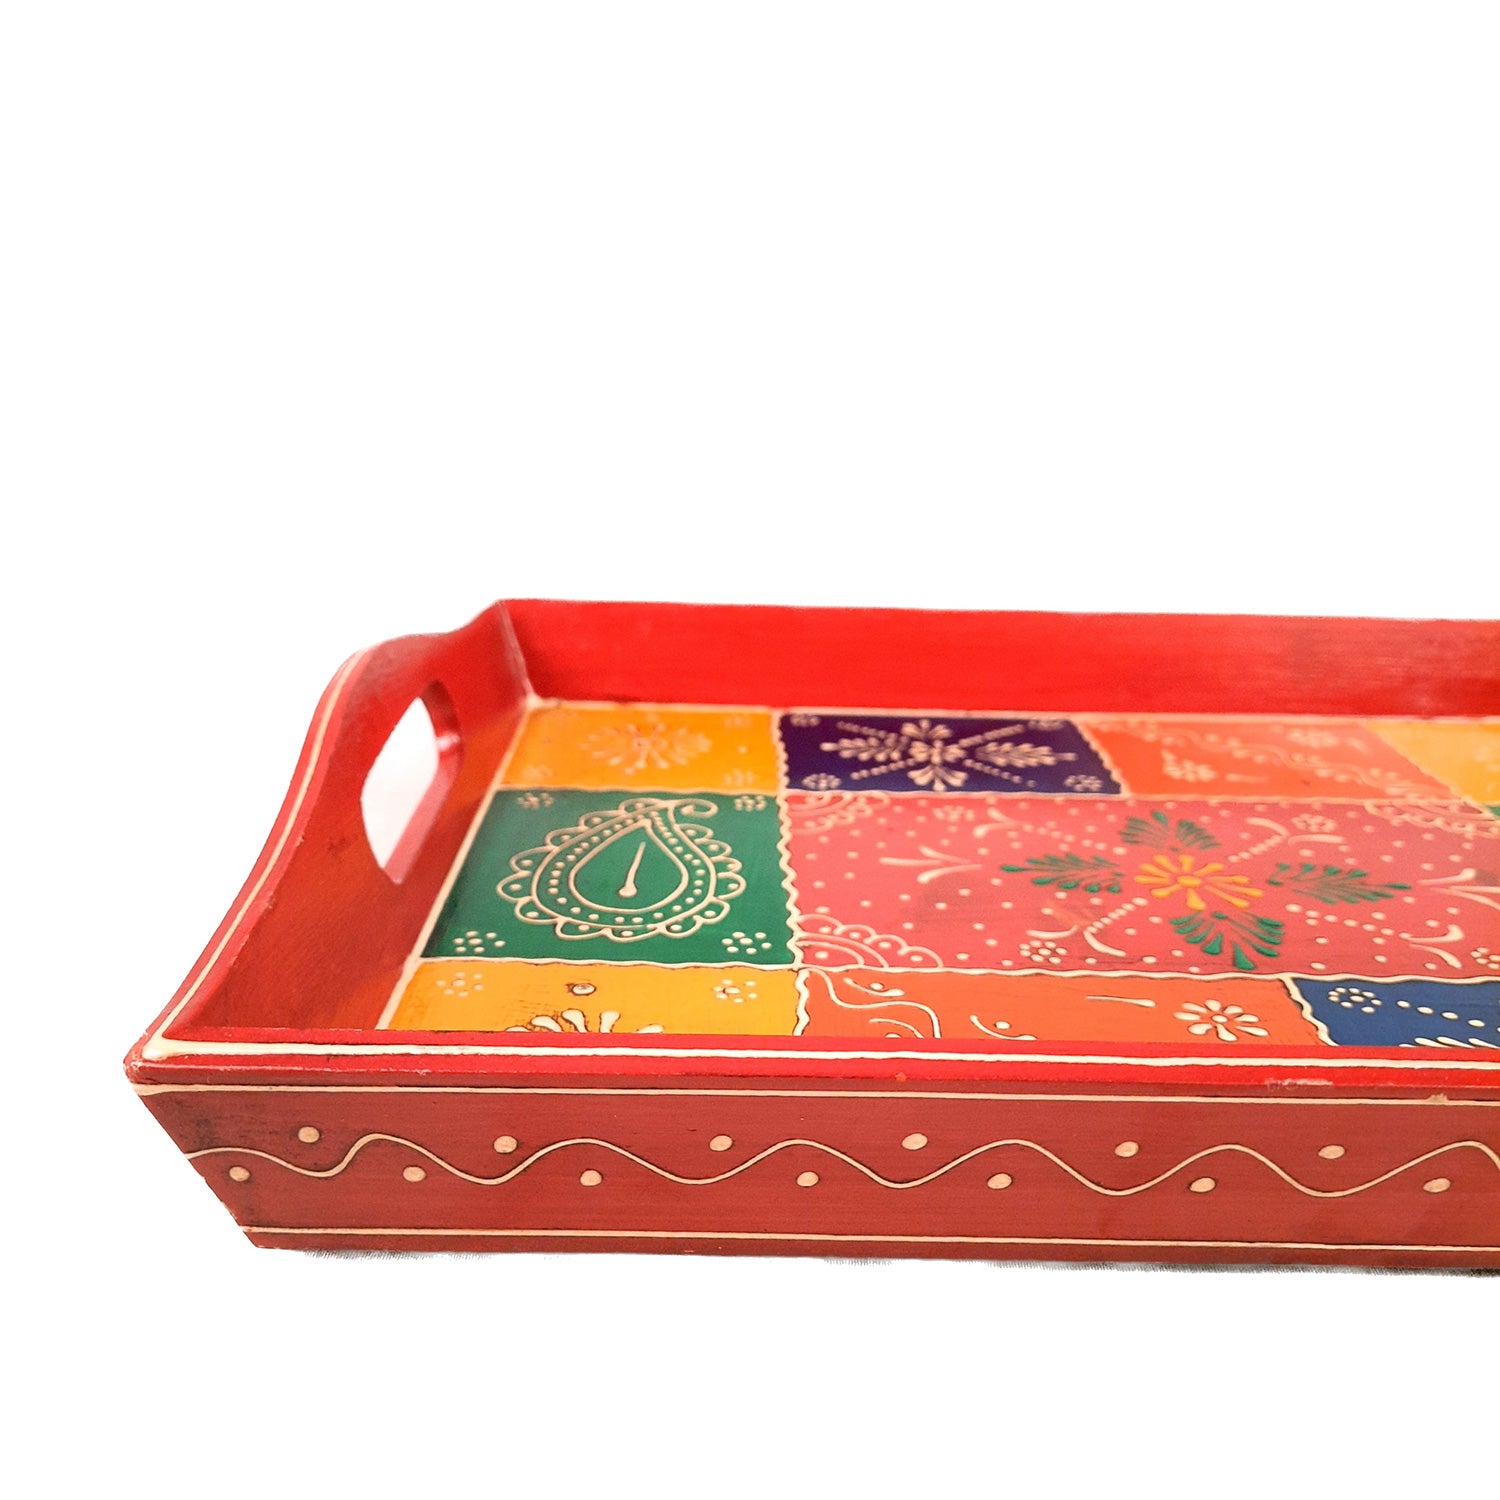 Decorative Serving Tray | Tray for office & Home - Set of 2- Apkamart